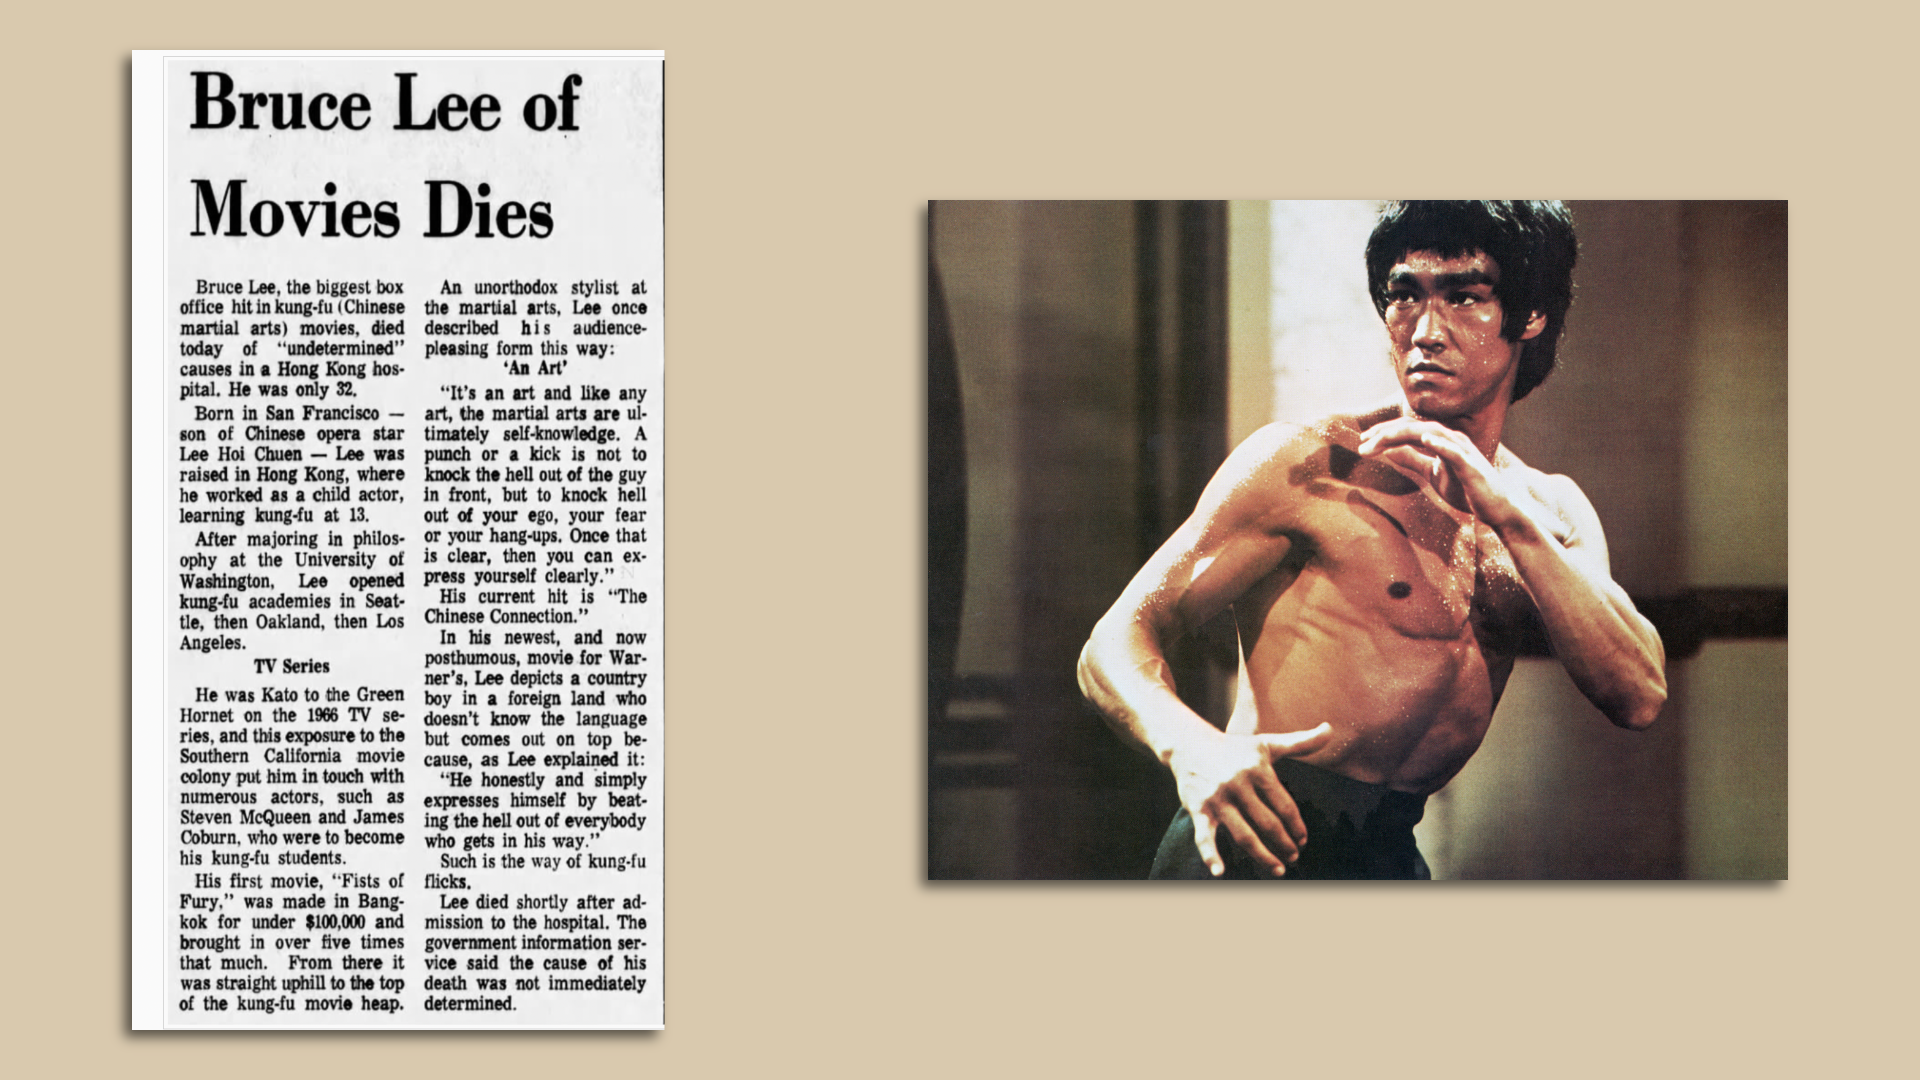 Today in history: Bruce Lee's sudden death - Axios Seattle